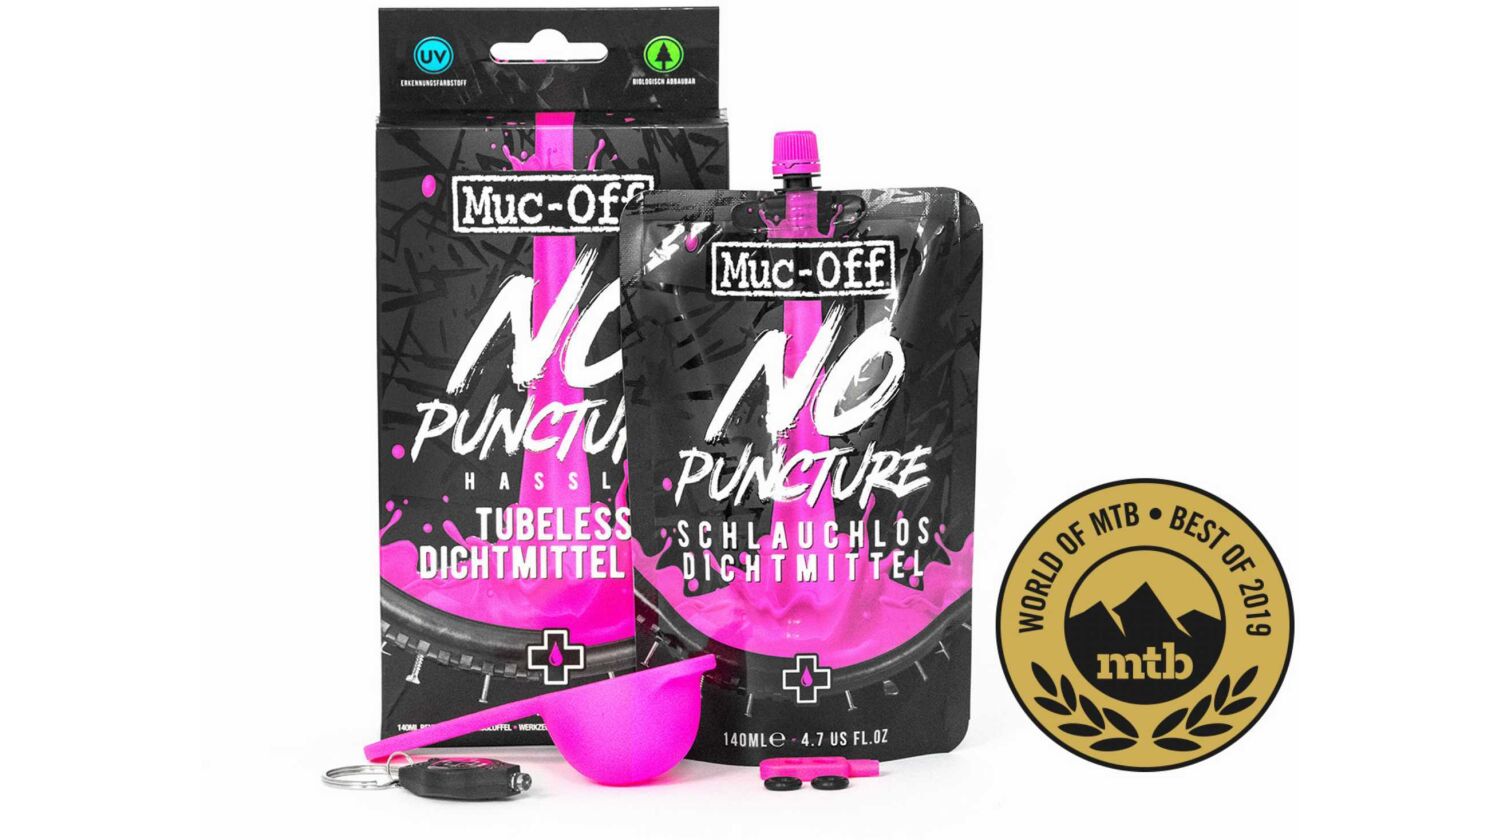 Muc-Off No Puncture Hassle Kit 140 ml